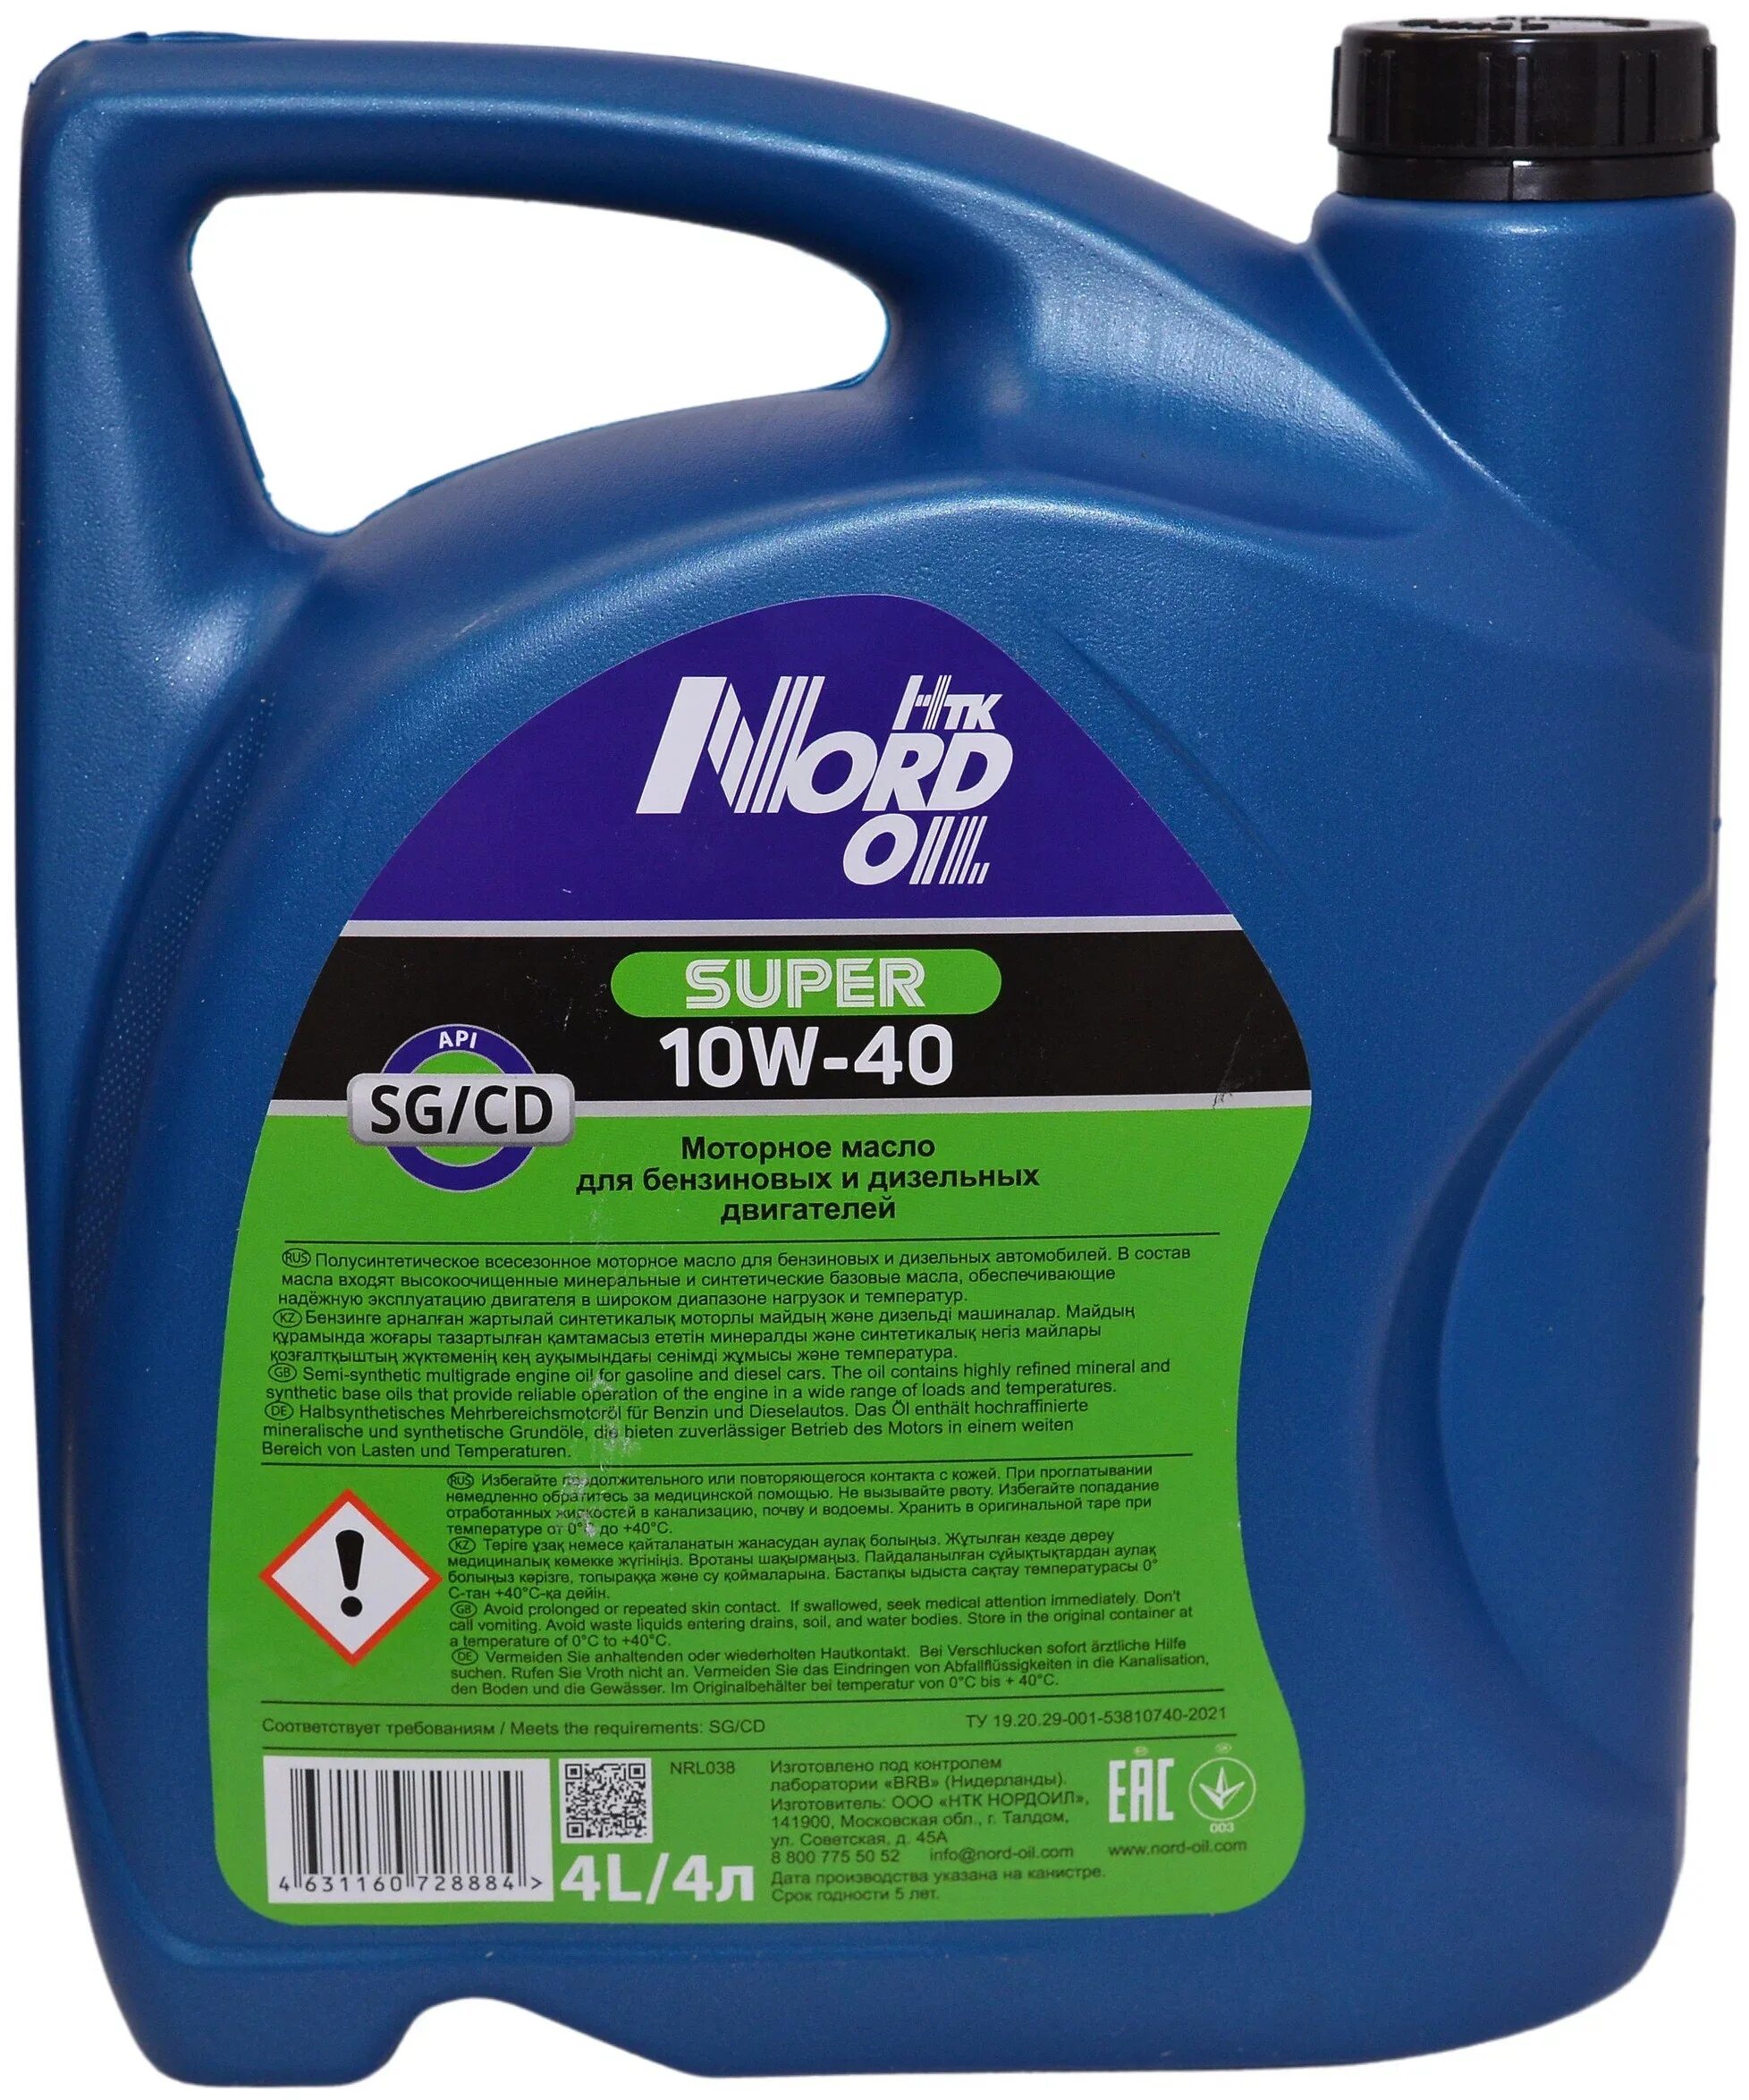 Моторное масло 1000. Nord Oil 10w-40. Масло Nord Oil 10 40. Nord Oil nrl038 масло моторное Nord Oil super 10w-4. Nrl038 Nord Oil масло Nord Oil super 10w-40 SG/CD 4л.